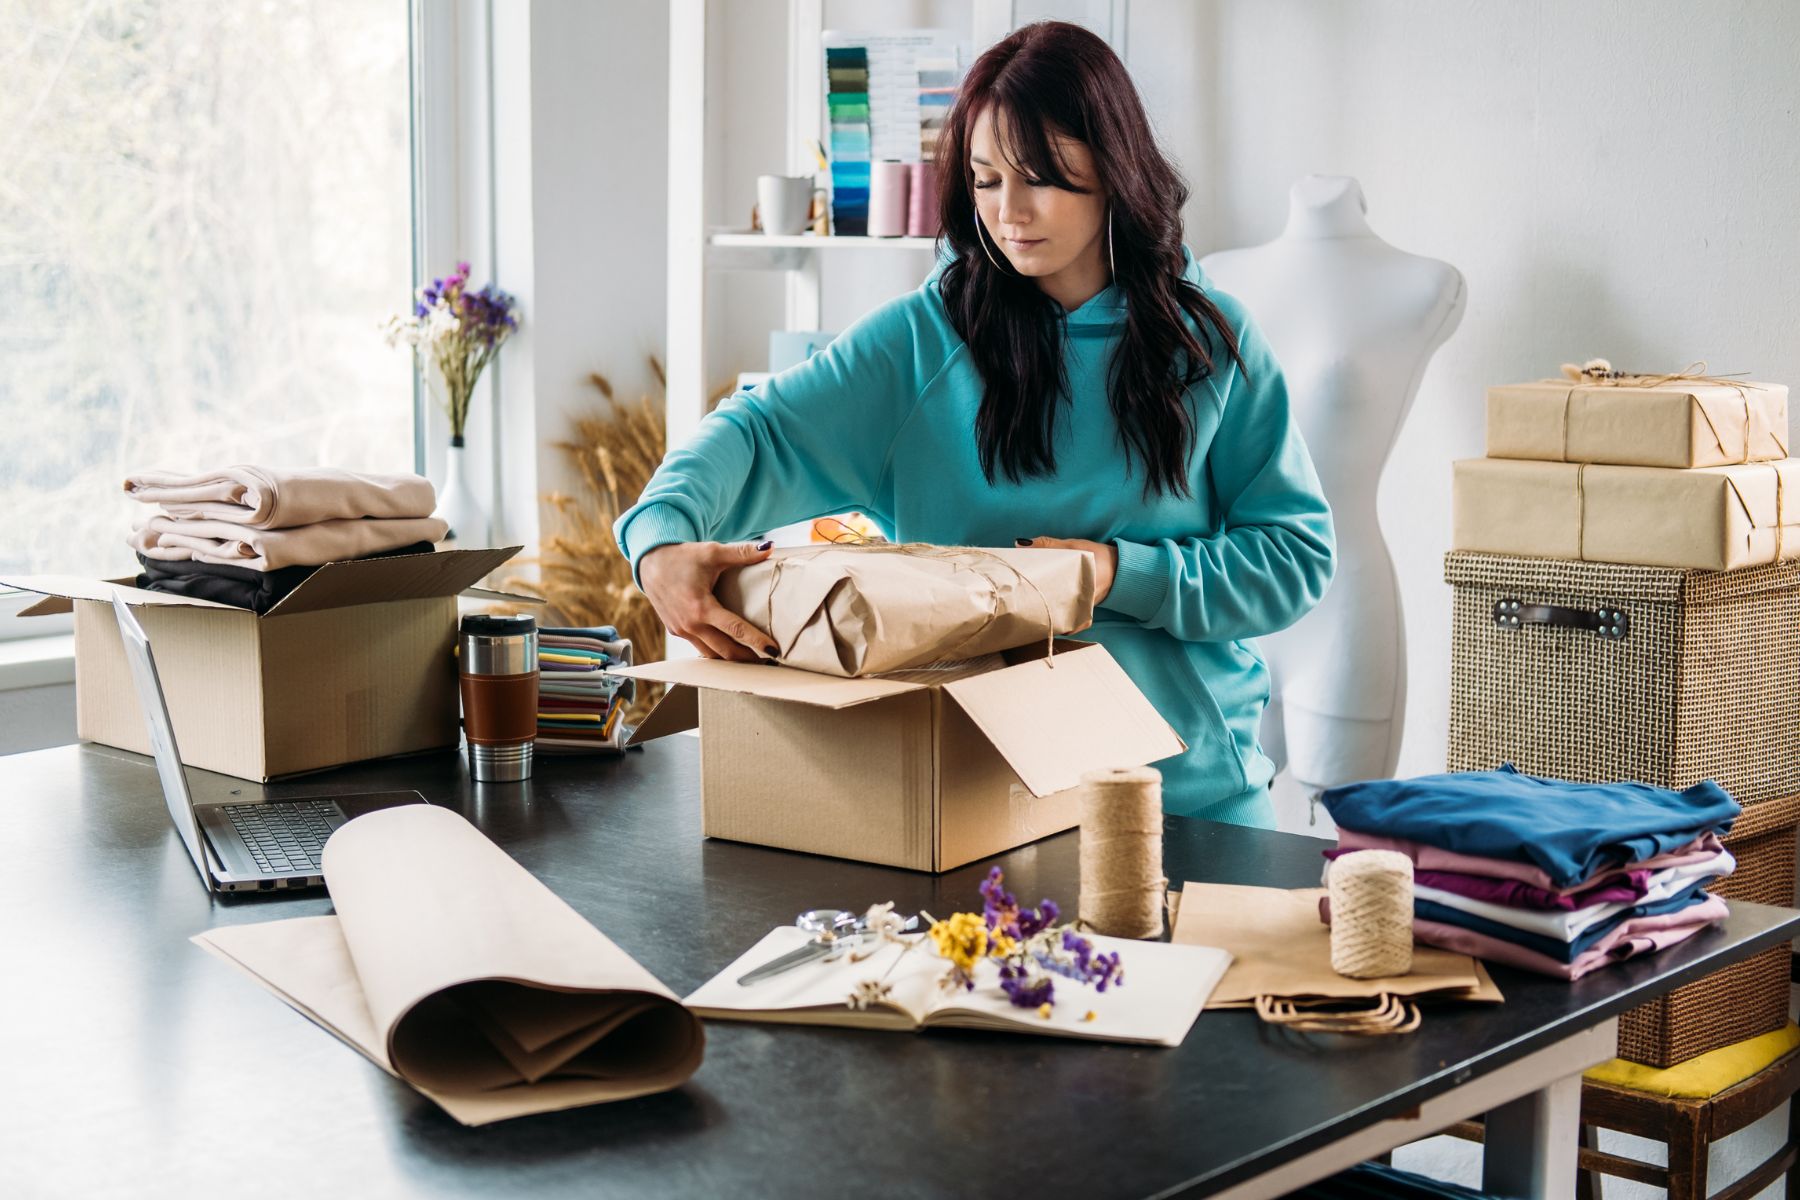 packing shipments for a craft business